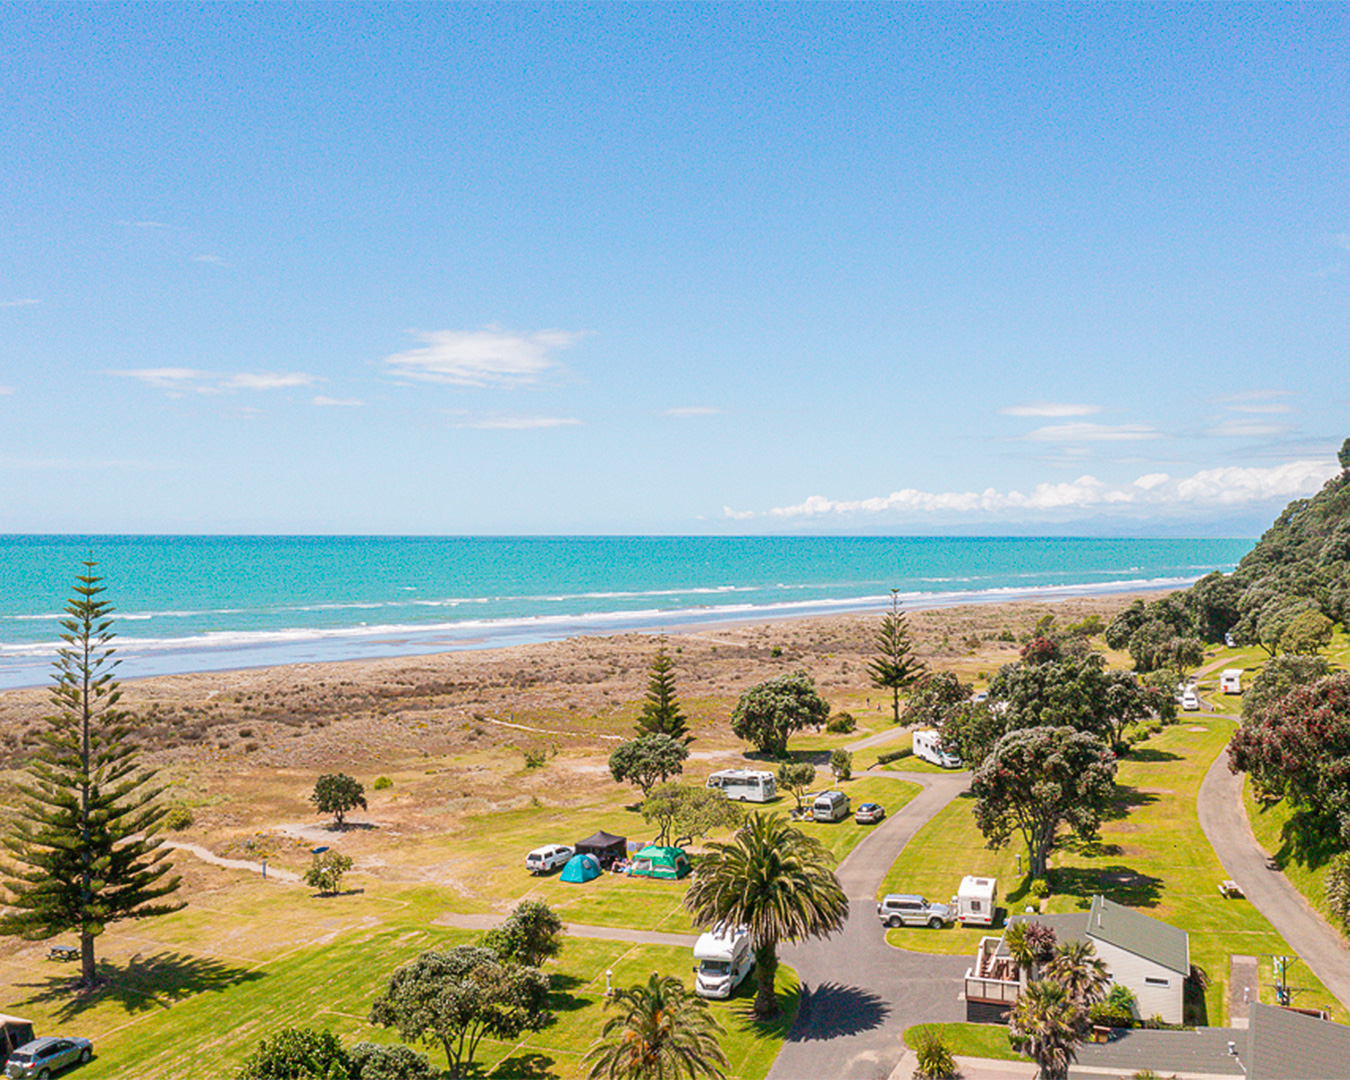 A view over the Tasman Holiday Parks - Ohiwa Beach